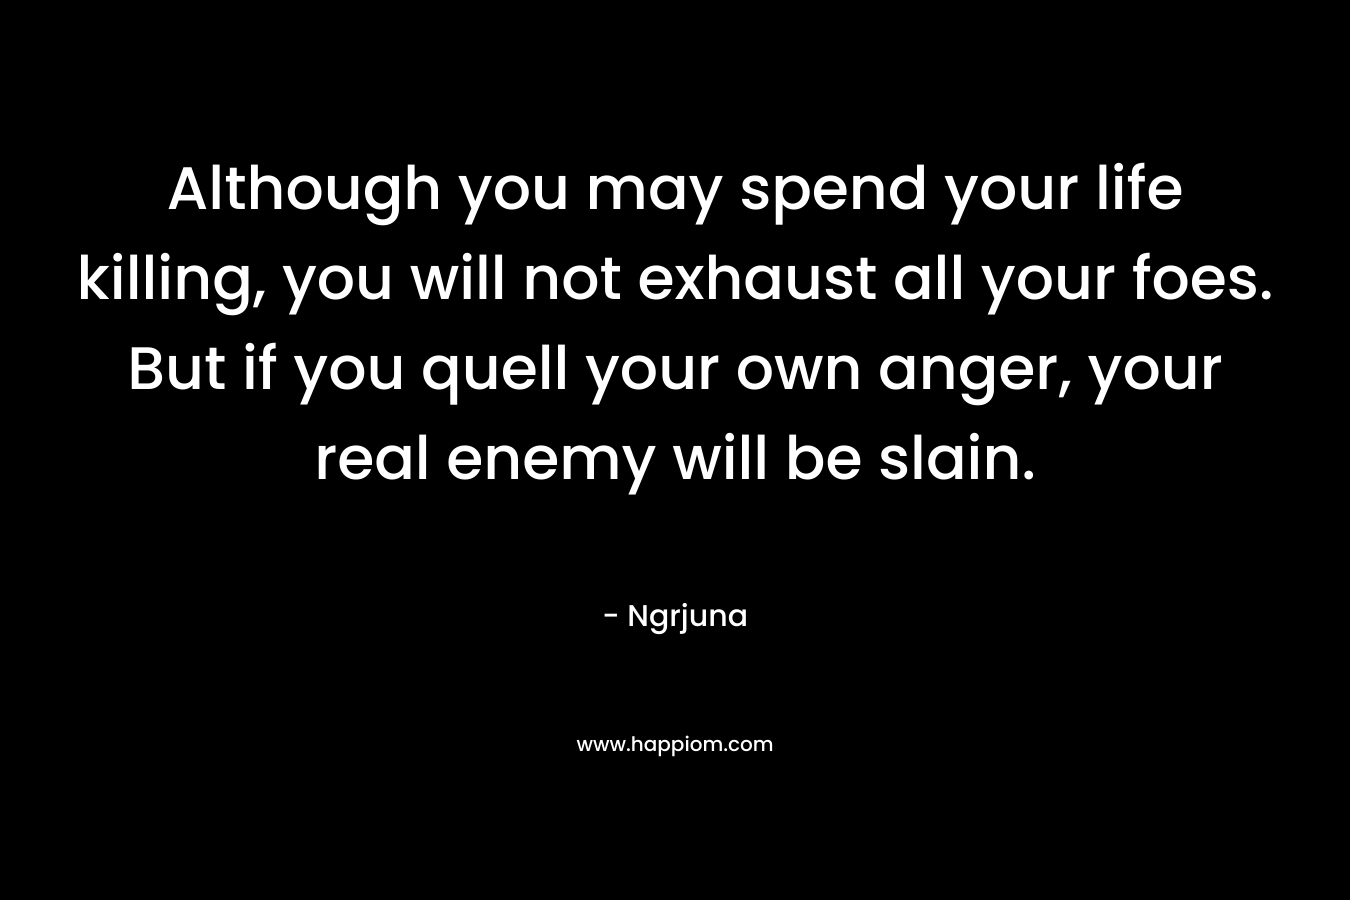 Although you may spend your life killing, you will not exhaust all your foes. But if you quell your own anger, your real enemy will be slain. – Ngrjuna